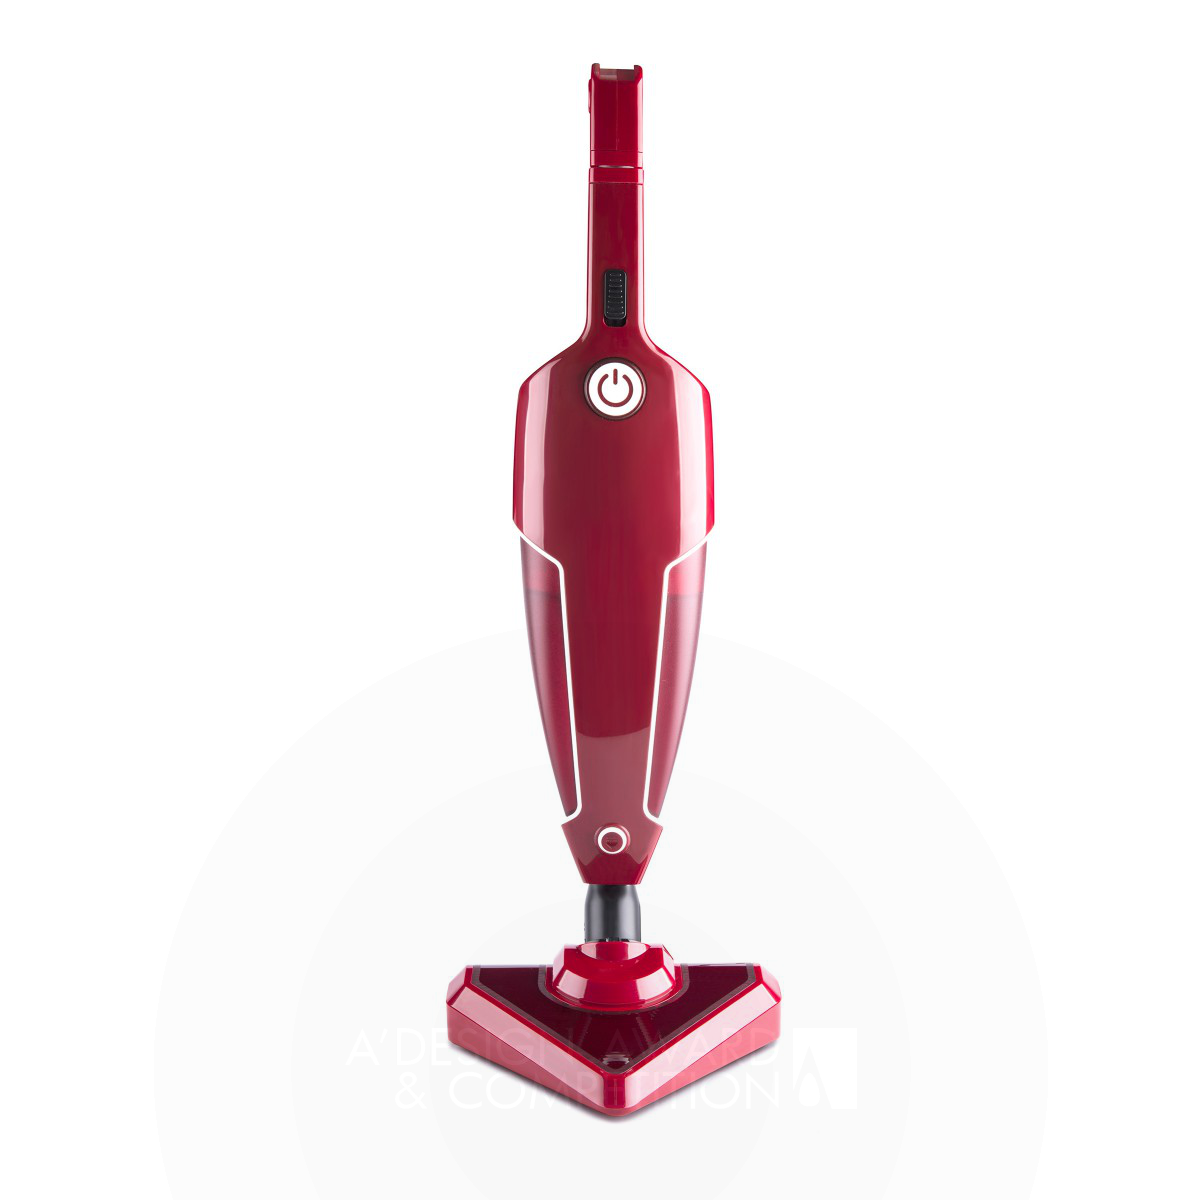 Tria Upright Vacuum Cleaner by Yasemin Ulukan